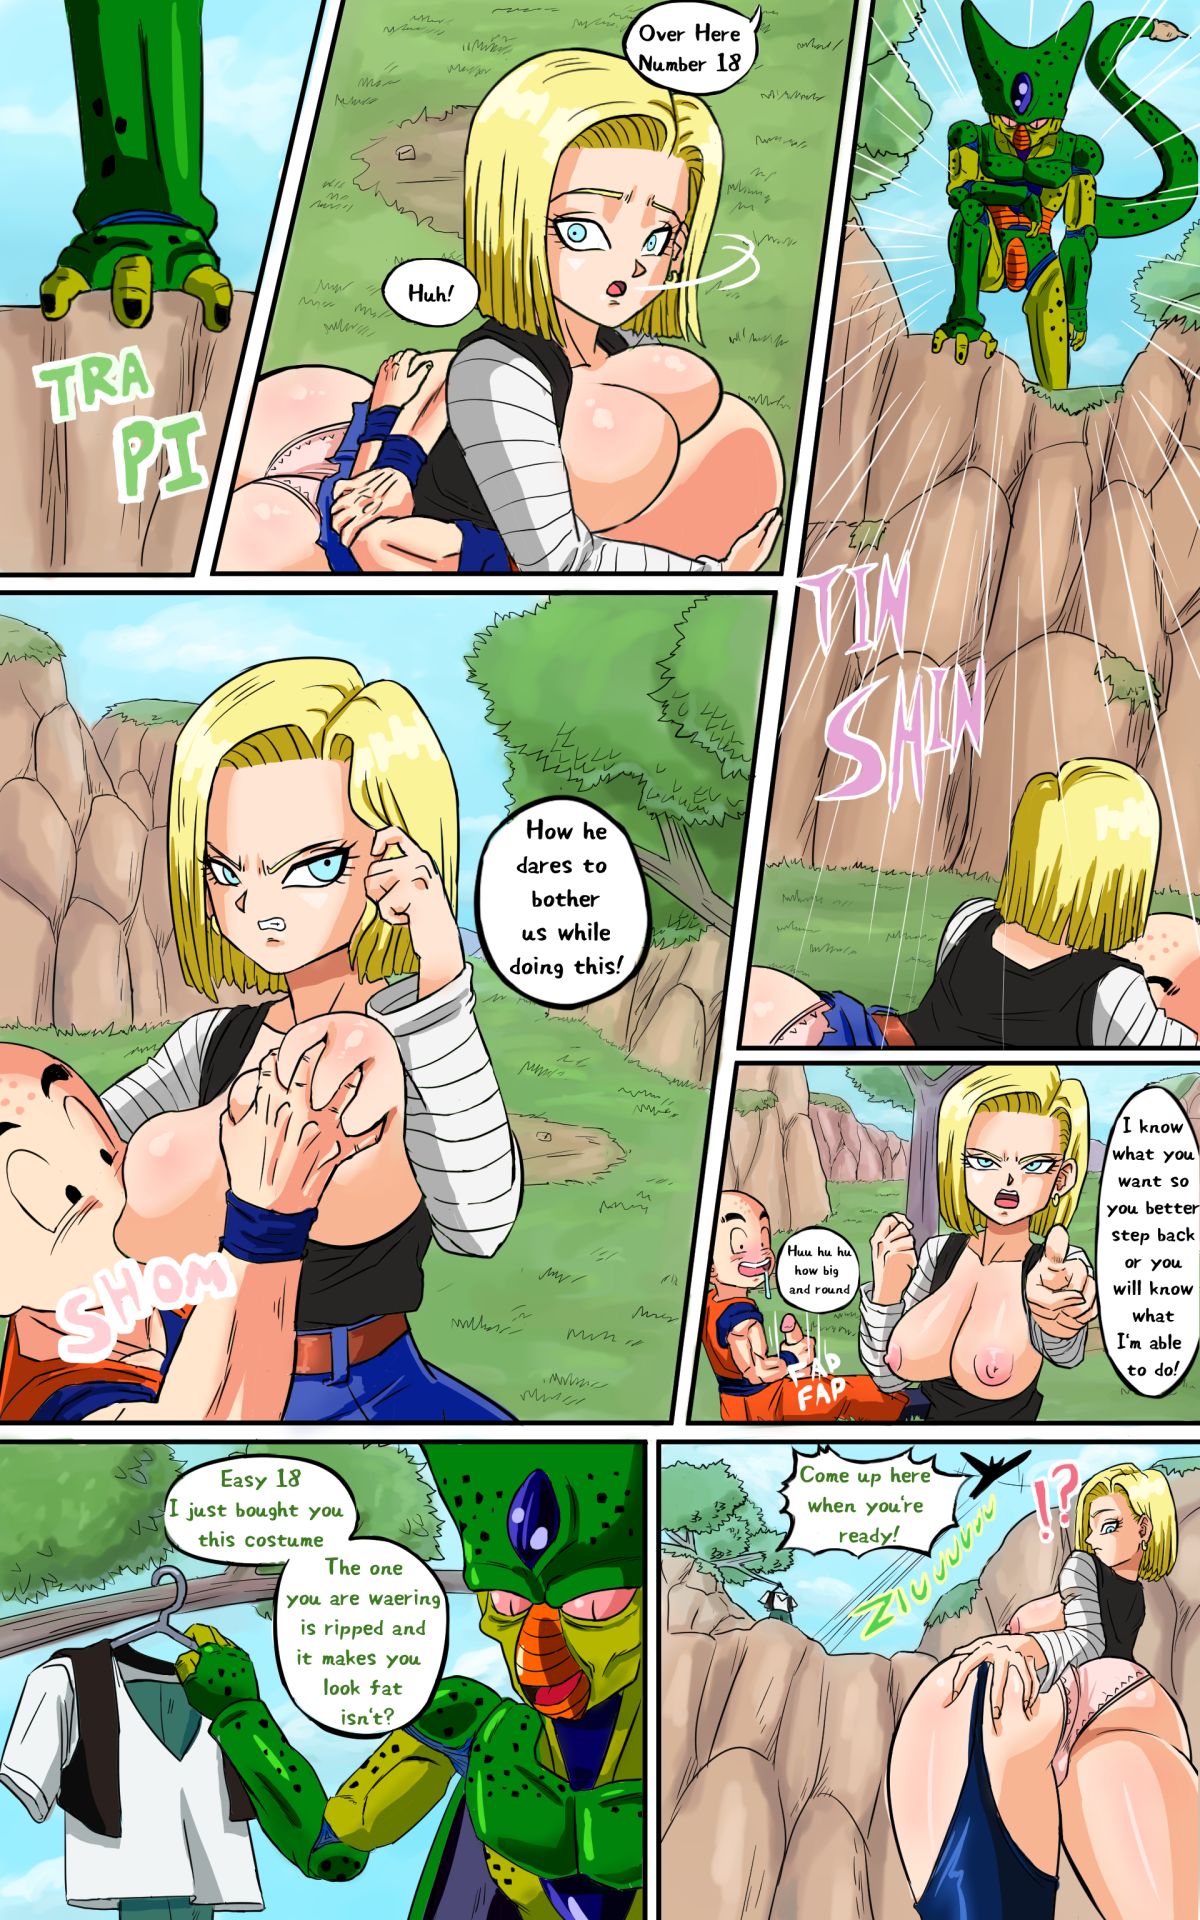 Android 18 meets Krillin - Pink Pawg.